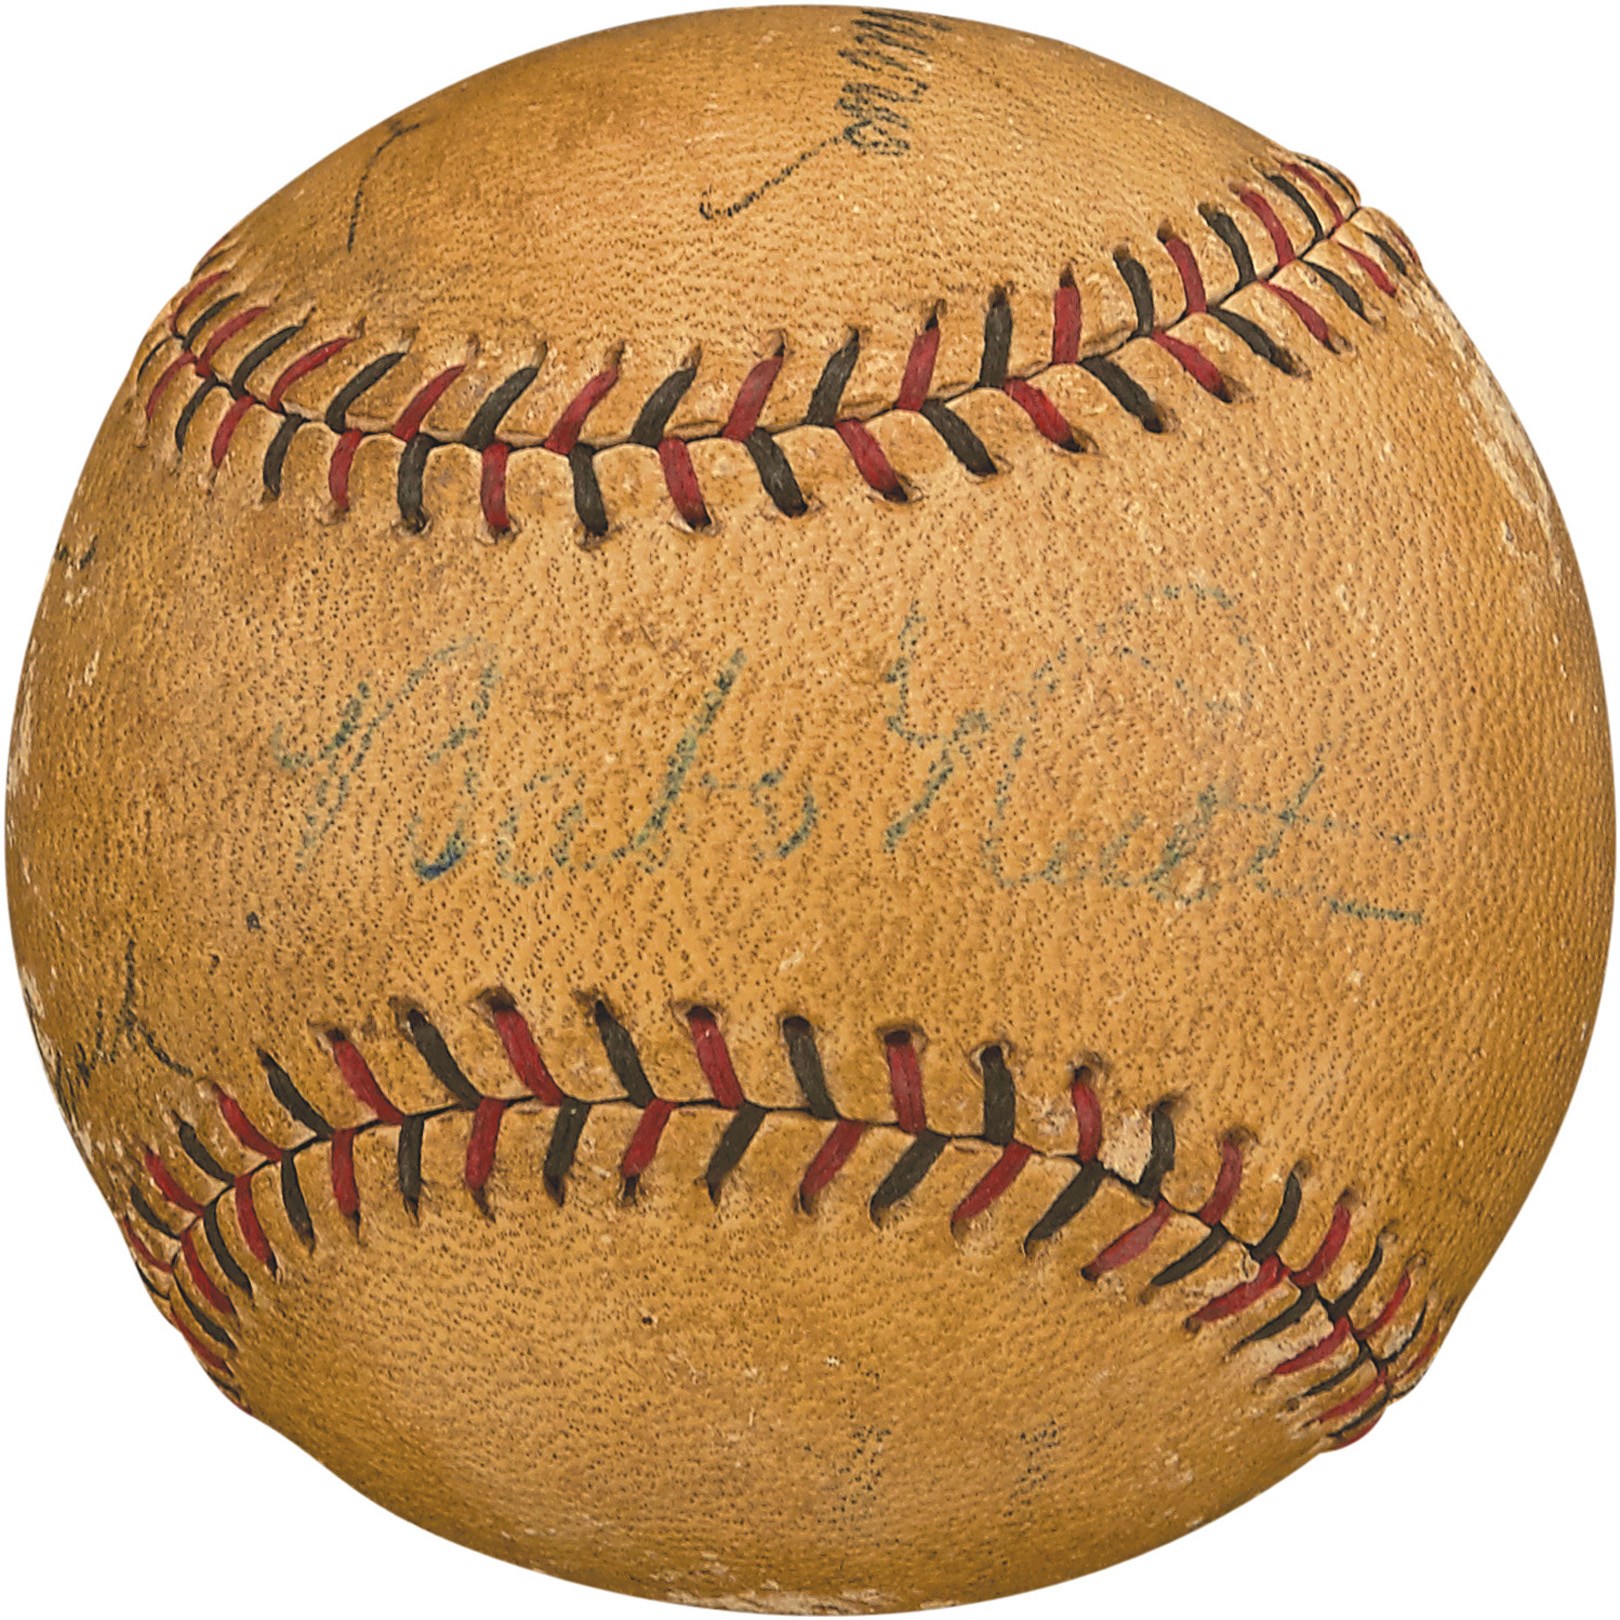 1930 World Series Teams-Signed Foul Ball w/Babe Ruth - Newspaper Article Provenance (PSA)